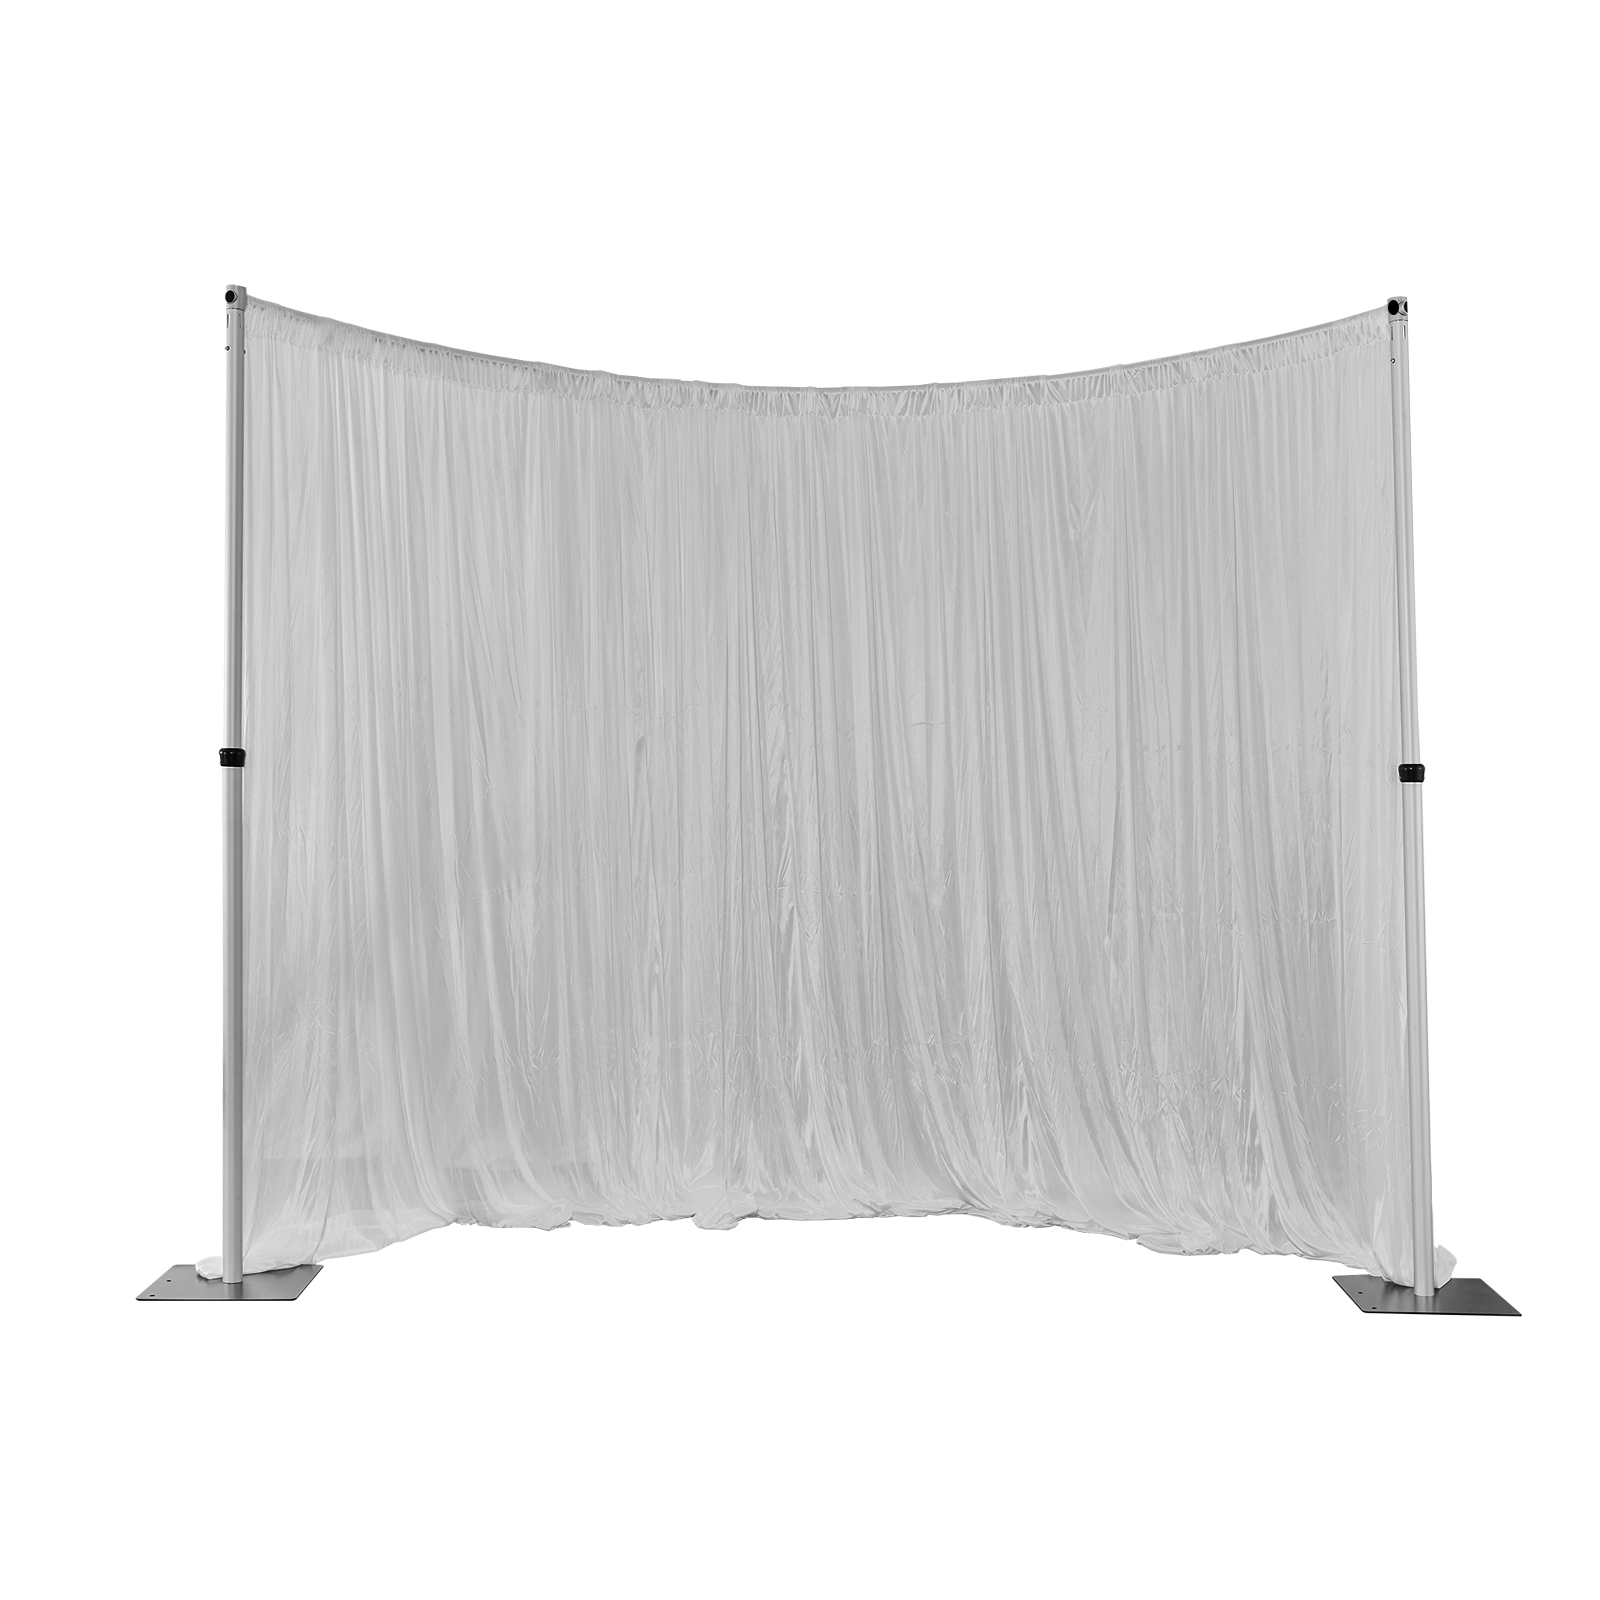 Hecis 6-10' Tall x 6-10' Wide Backdrop Stand Adjustable for Wedding De